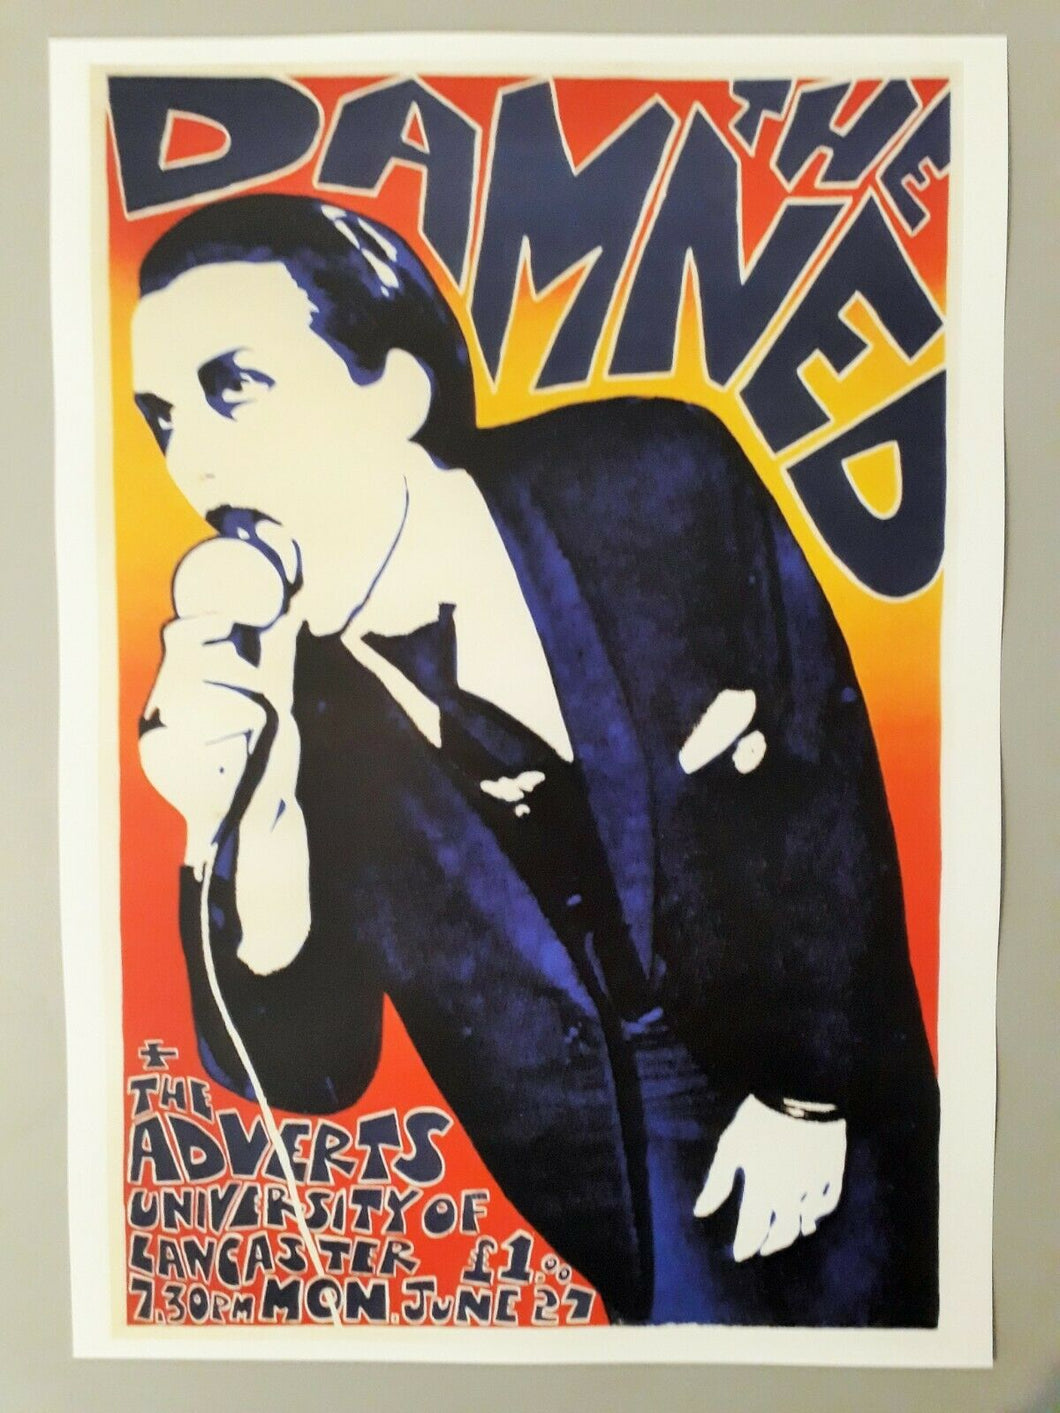 The Damned concert poster - The Adverts rare promotional Live in 1977 A3 reprint - Original Music and Movie Posters for sale from Bamalama - Online Poster Store UK London